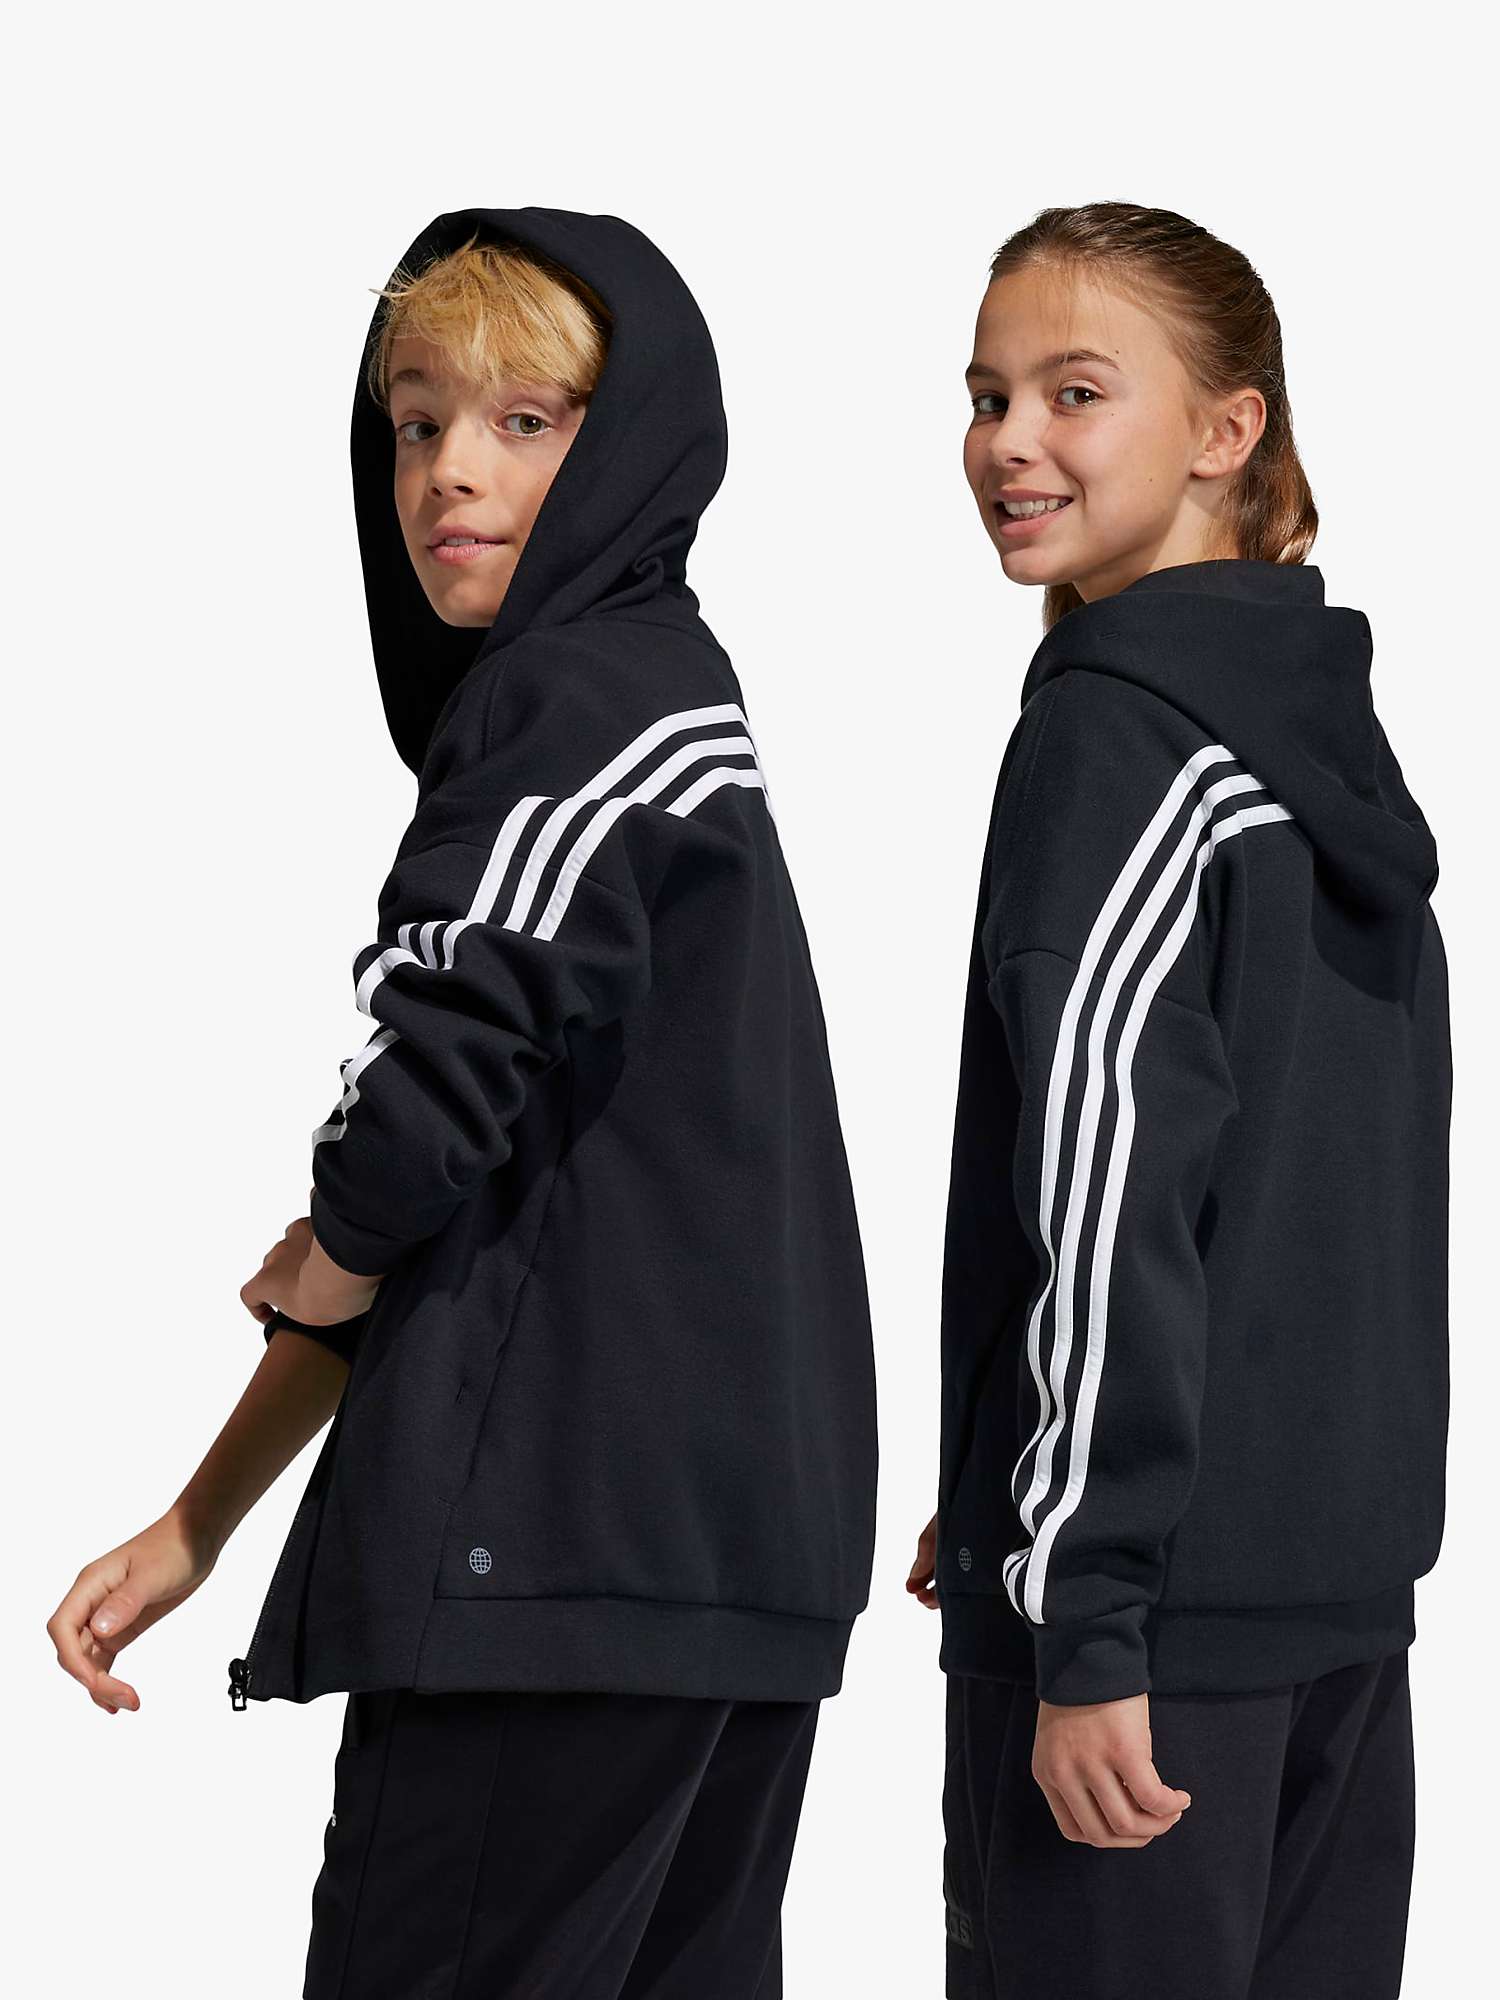 Buy adidas Kids' Future Icons 3 Stripes Full Zip Hooded Tracksuit Top, Black/White Online at johnlewis.com